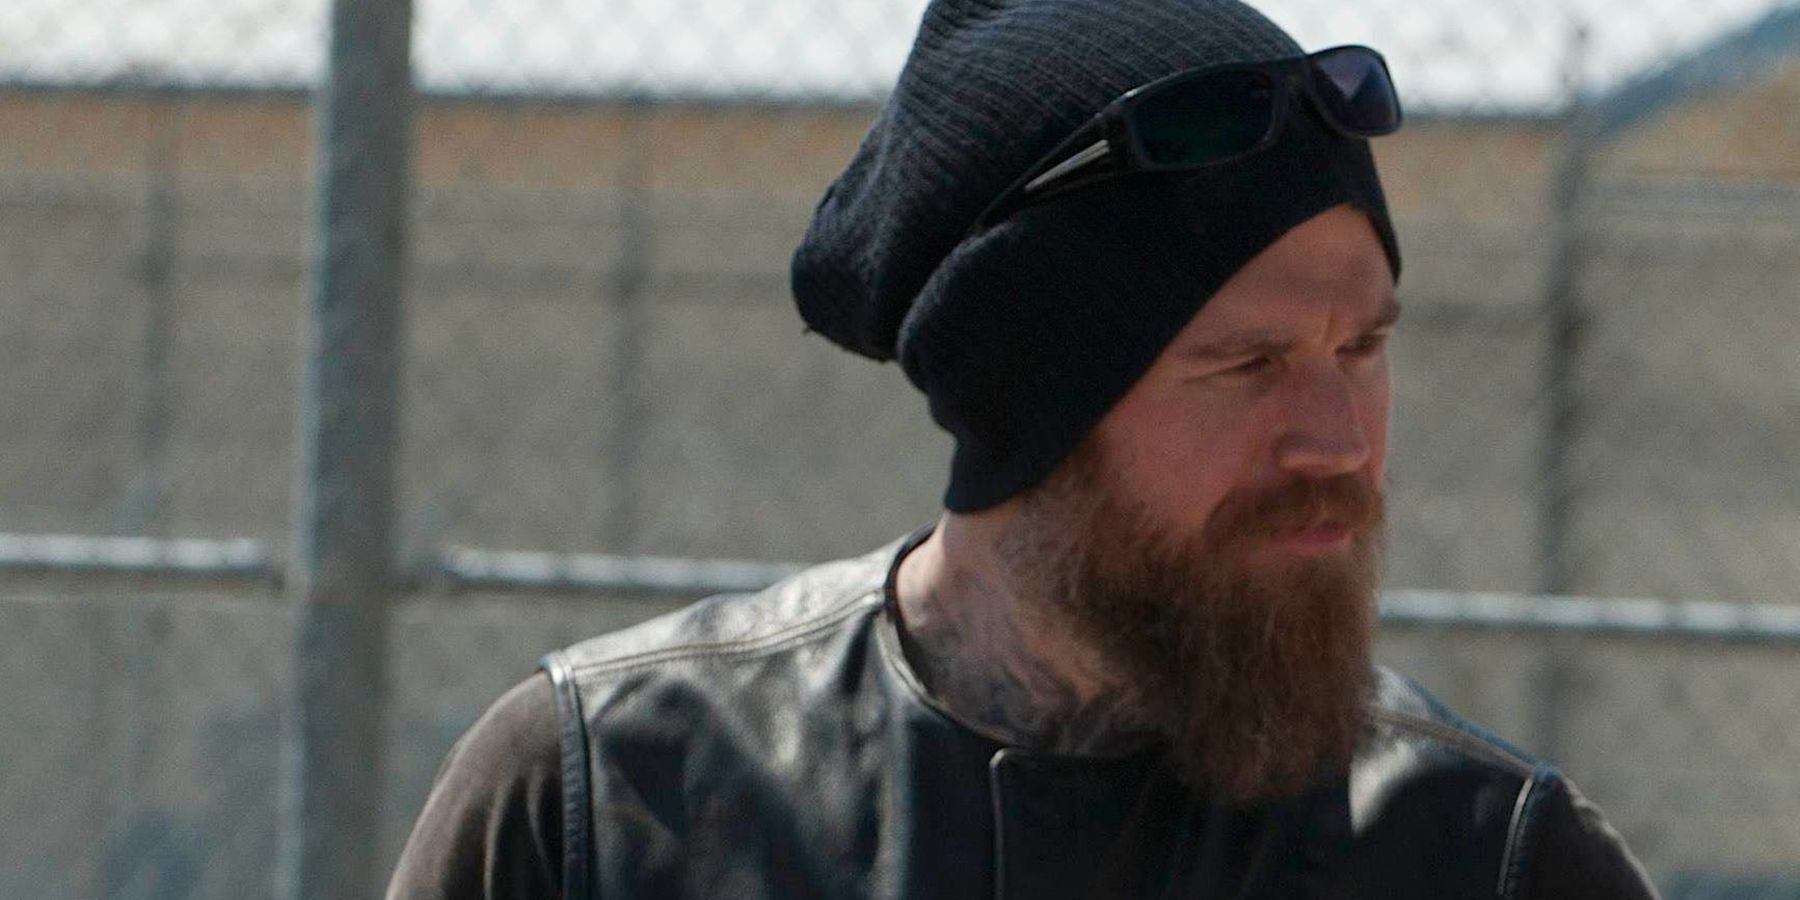 Opie from the Sons of Anarchy series.